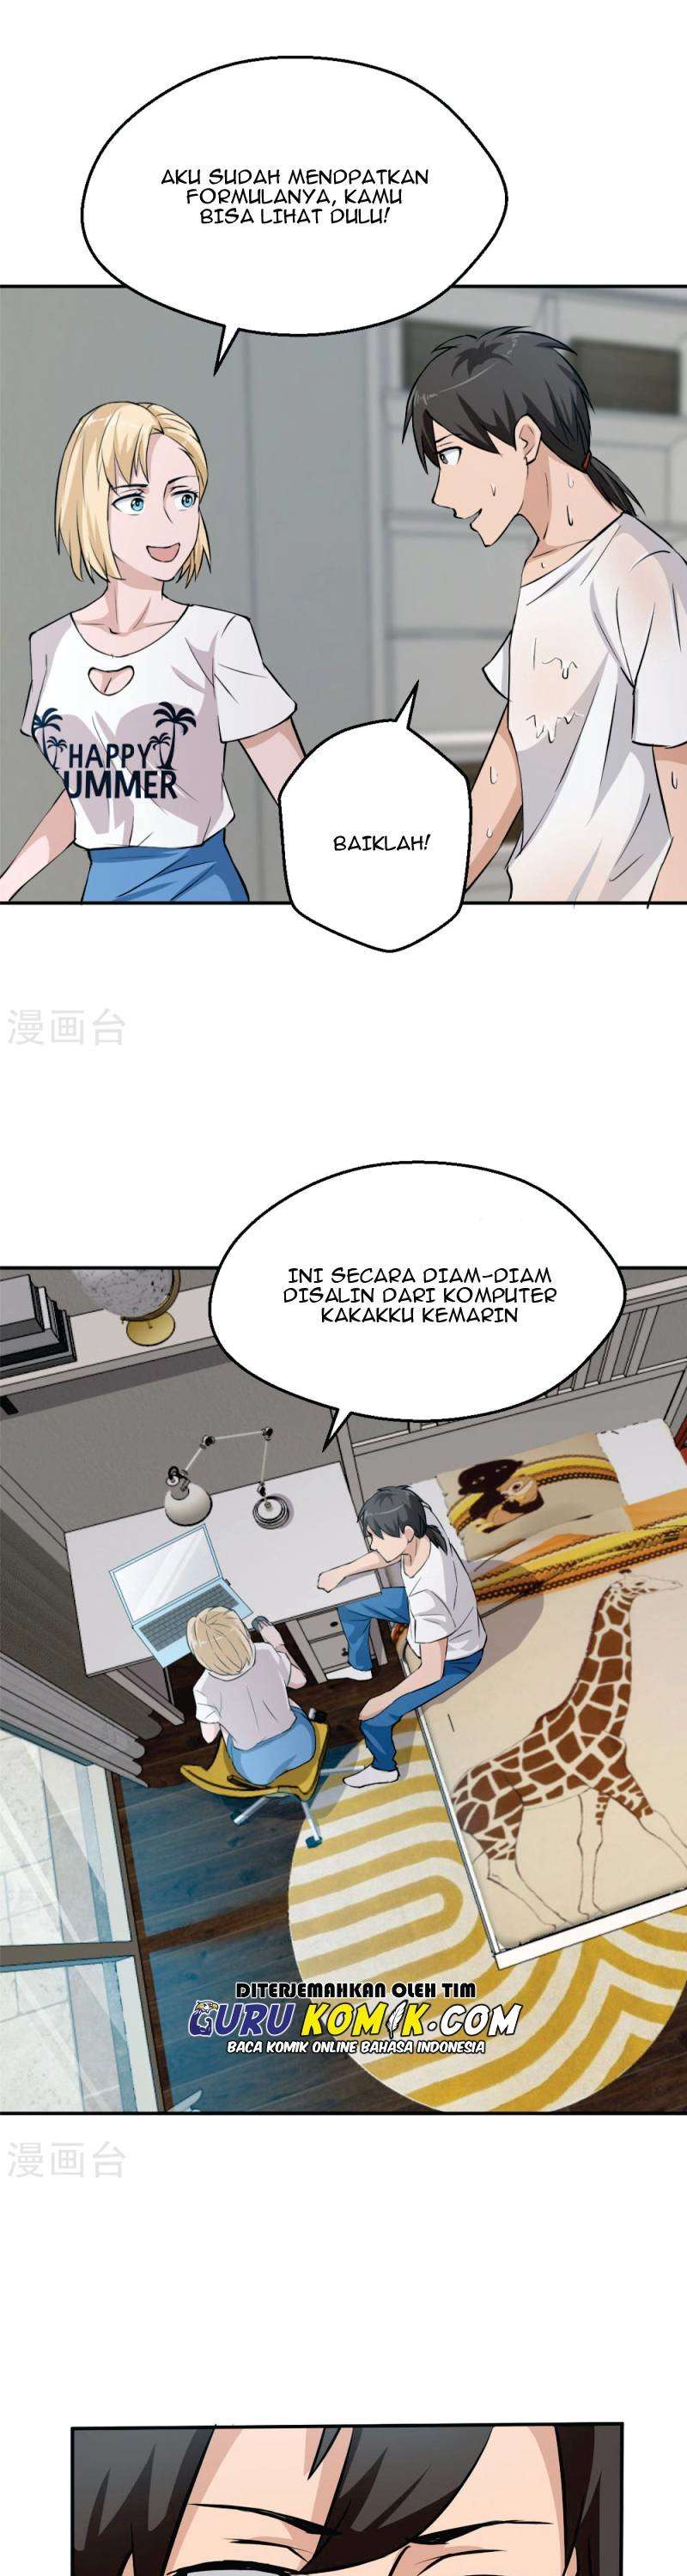 Close Mad Doctor Chapter 53-56 15